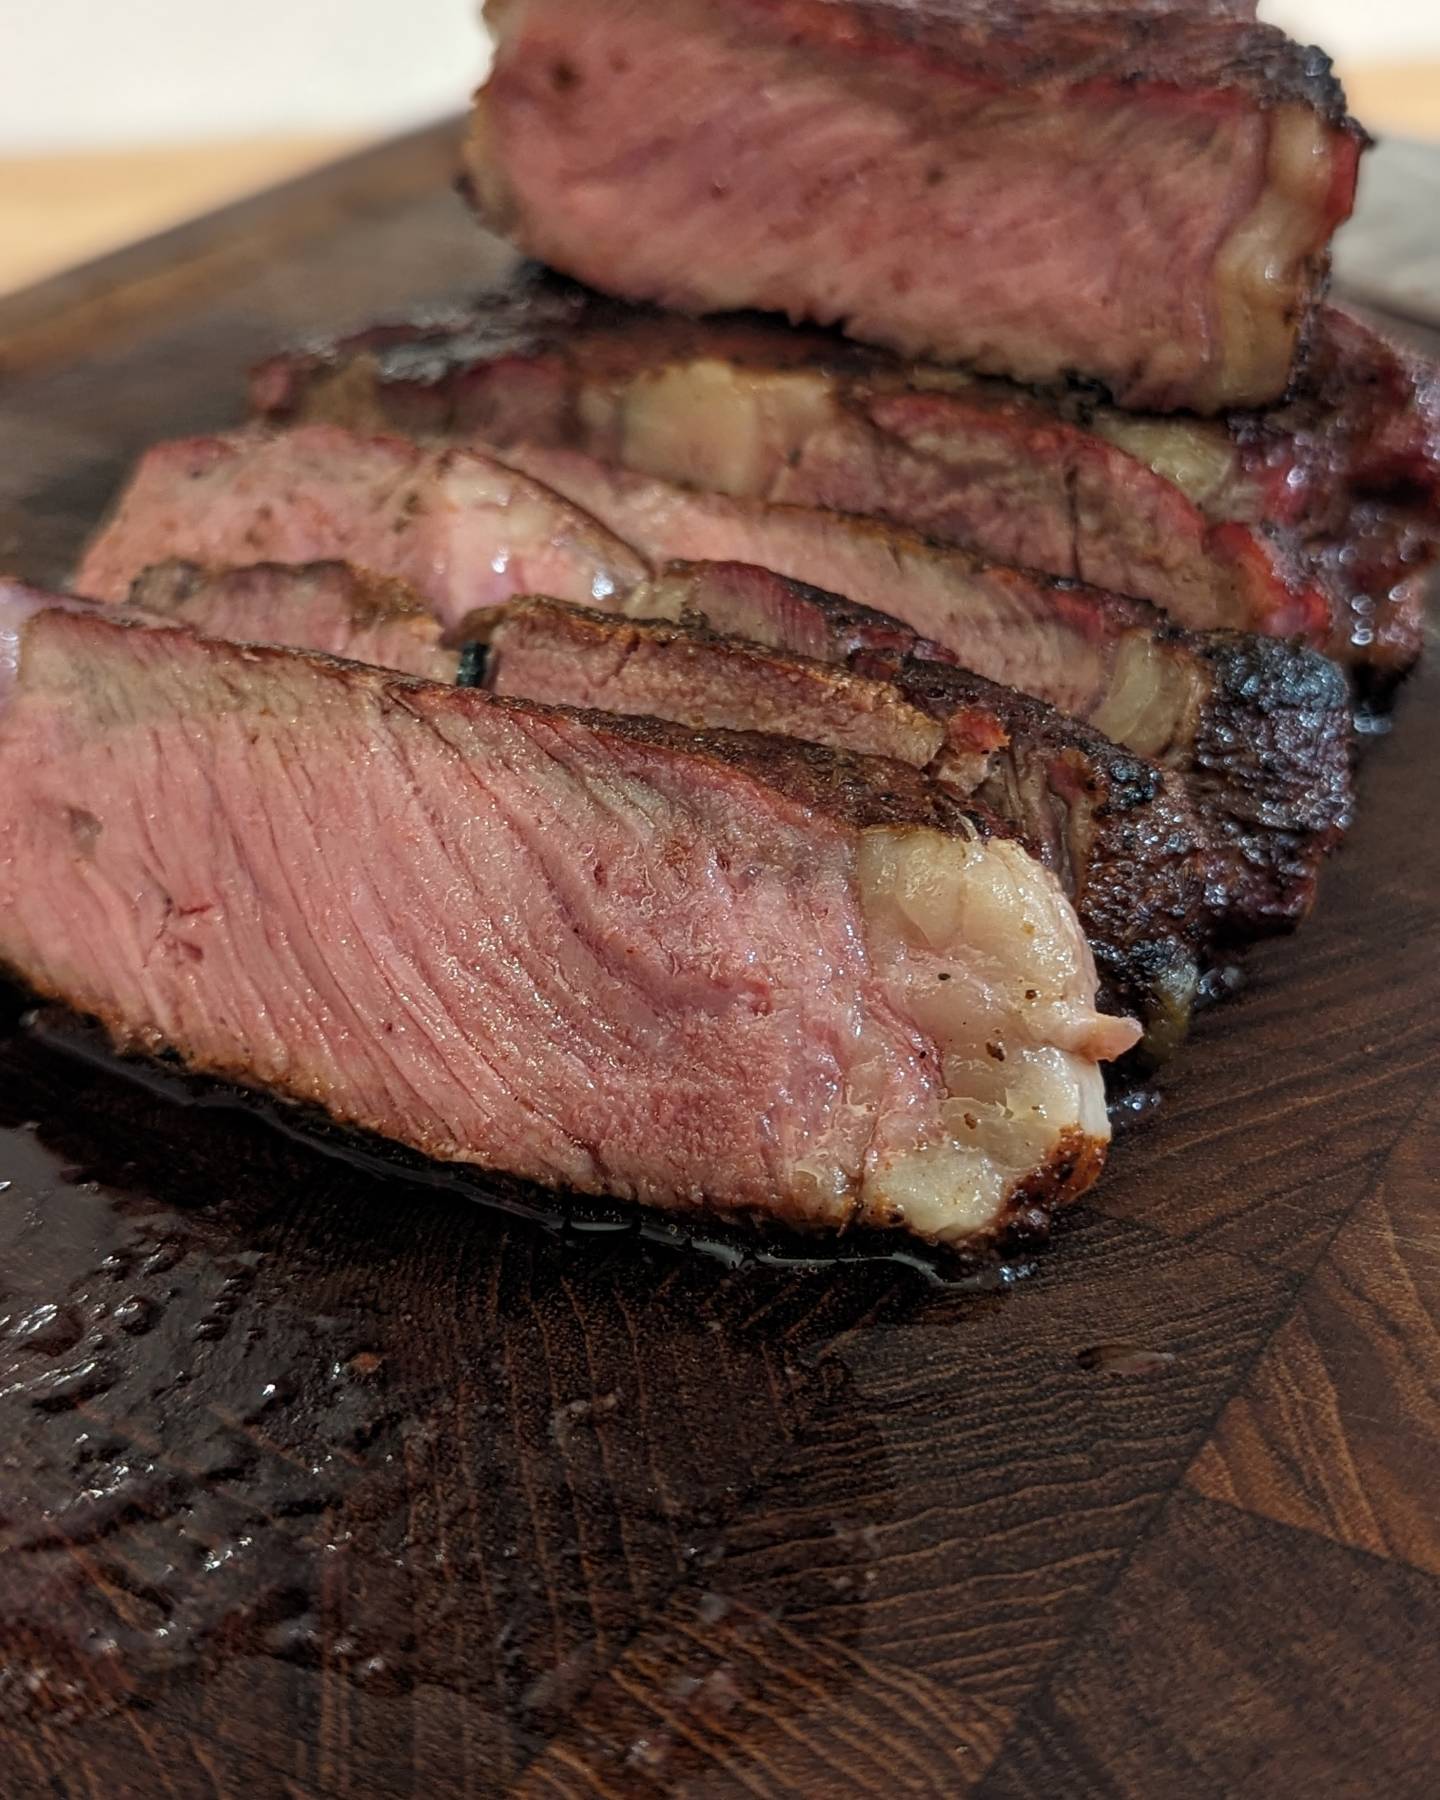 Sometimes you just need steak.Reverse seared, smoked to 118, pan seared to 132, rested and sliced. @bearmountainbbq gourmet blend did most of the work here before a quick sear in my @hexclad pan.I used the @thermomaven_culinary to keep me honest with my temps. Check out how quick that thermometer updates! #steak #steakdinner #beef #reverseseared #panseared #searingsteak #platofmeat #simplepleasures